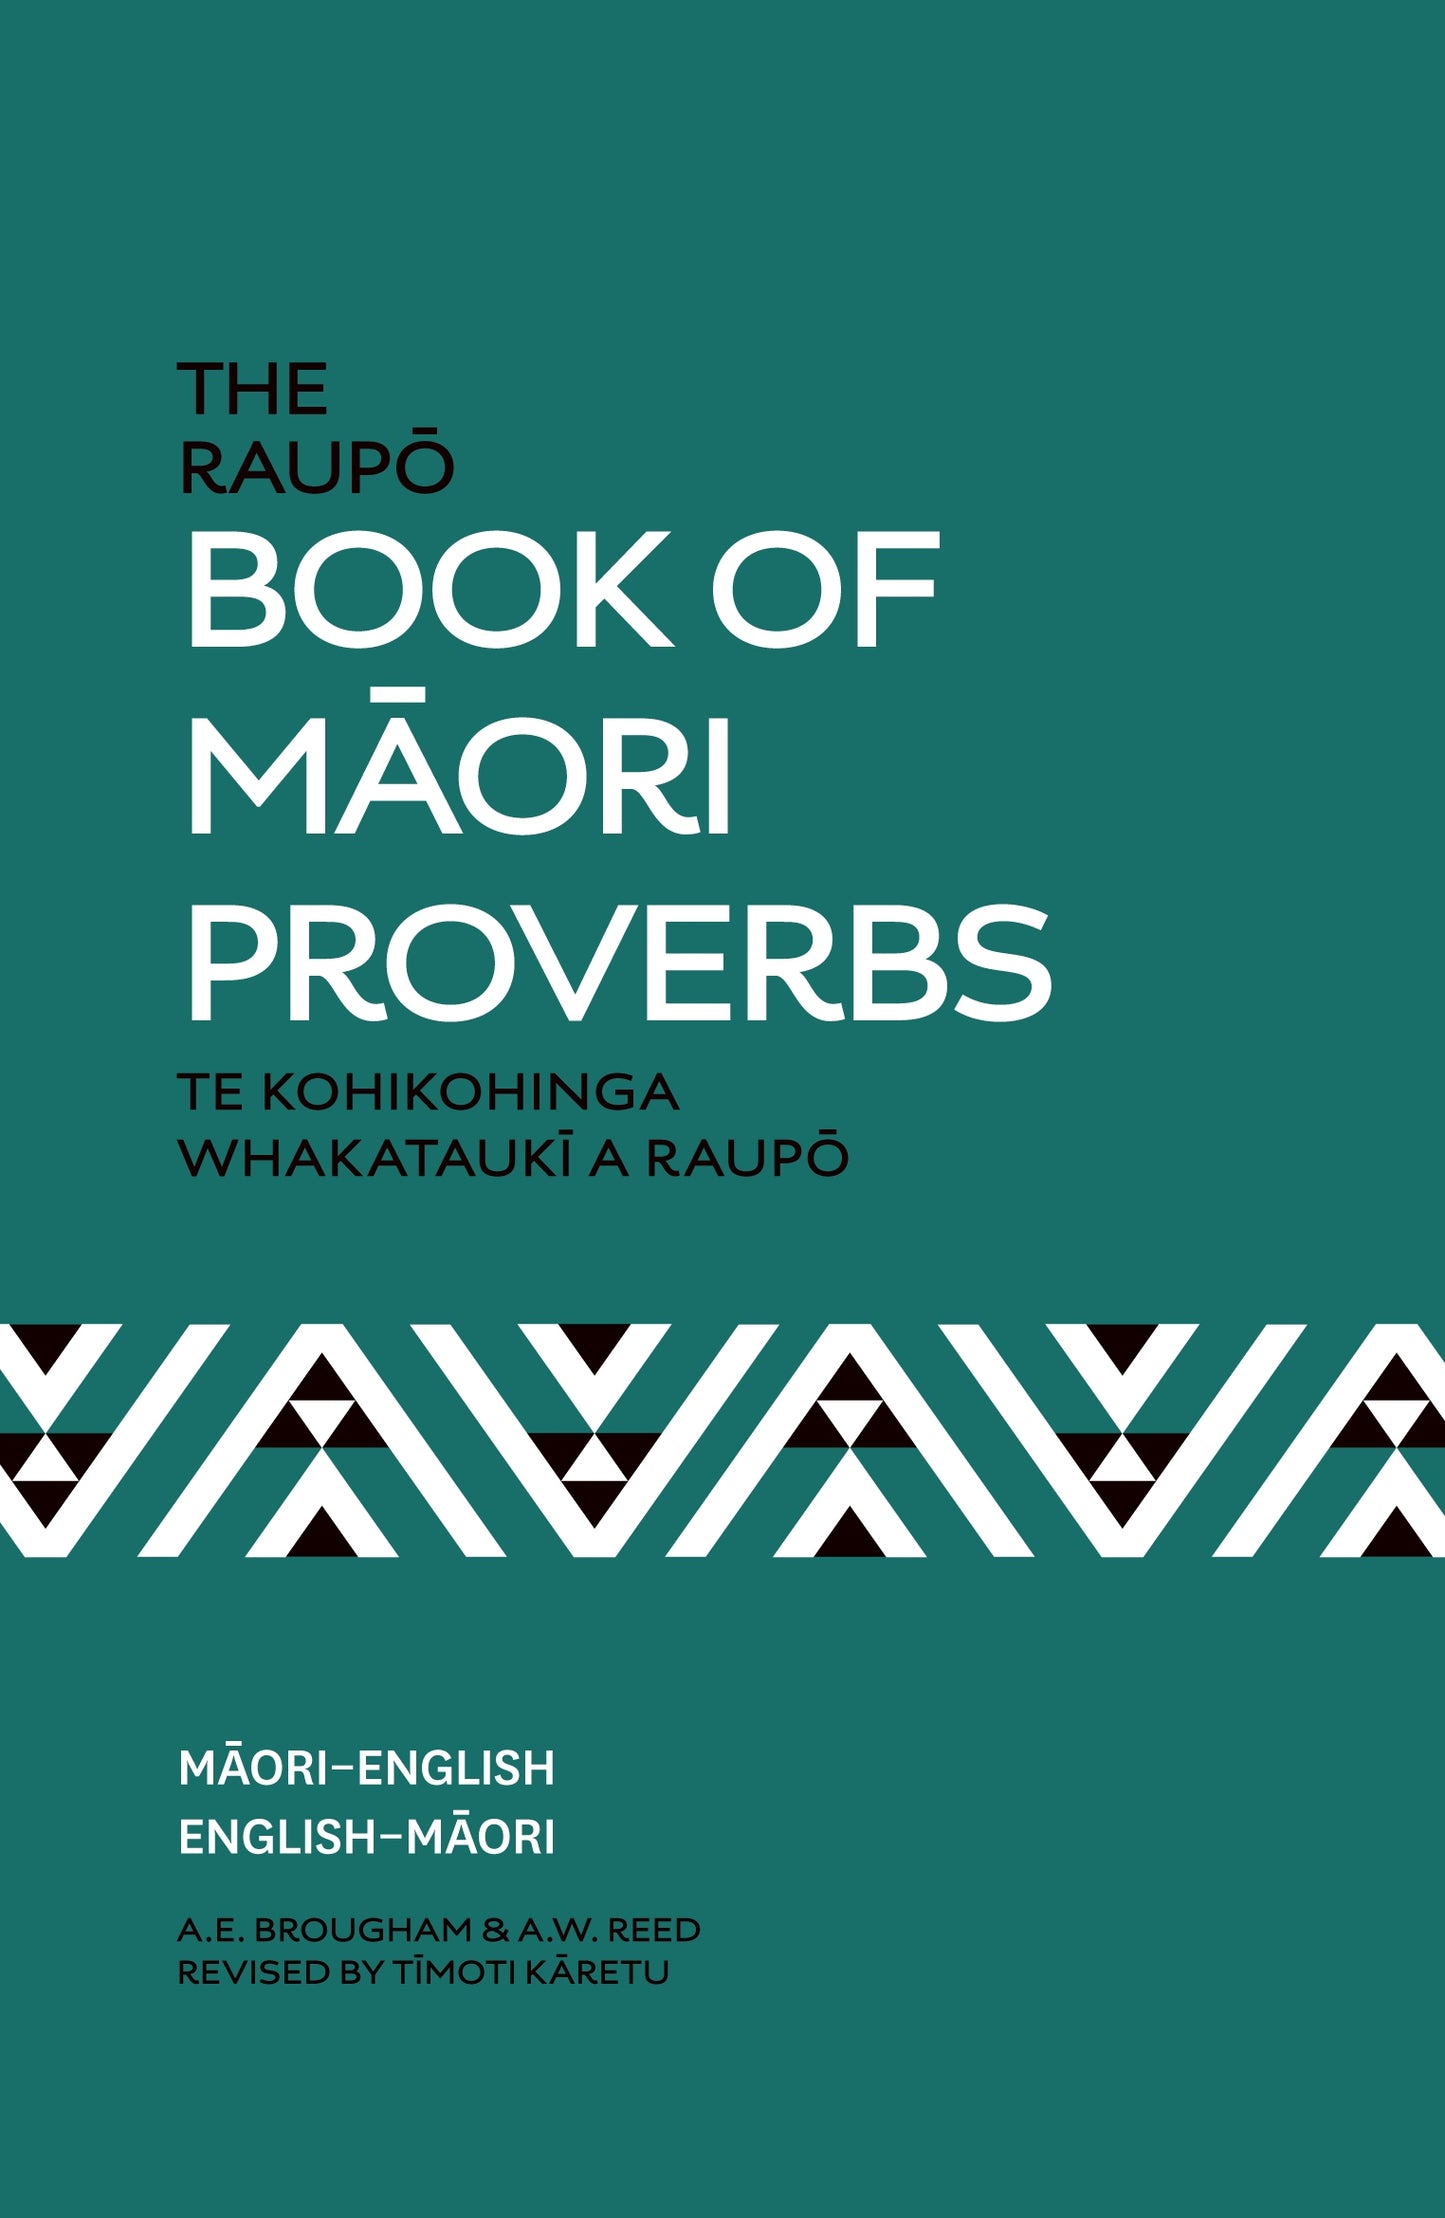 The Raupō Book of Māori Proverbs by A.W. Reed - City Books & Lotto